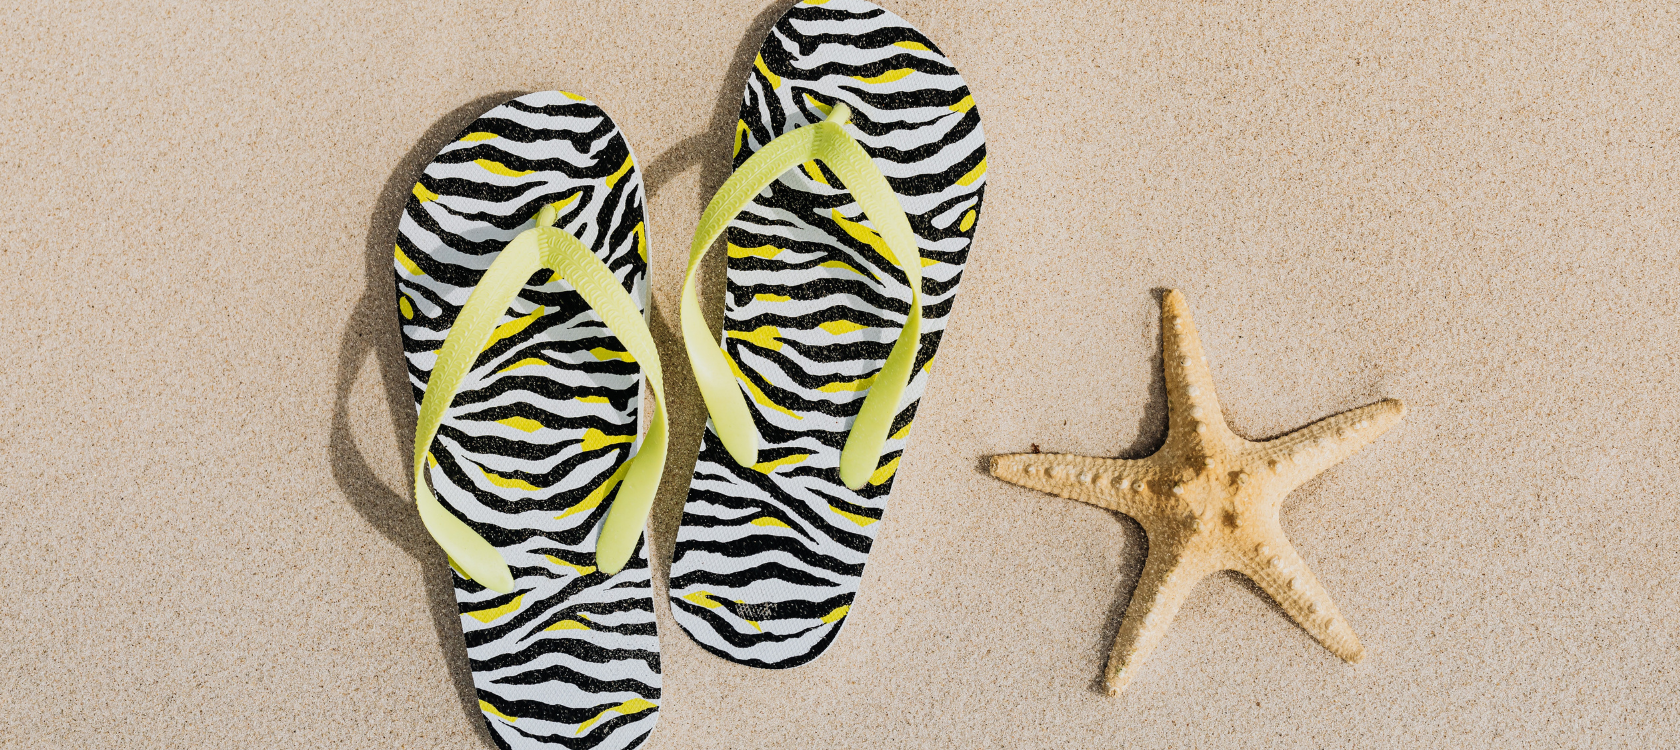 Get Your Feet Sandal Ready for More Sun!